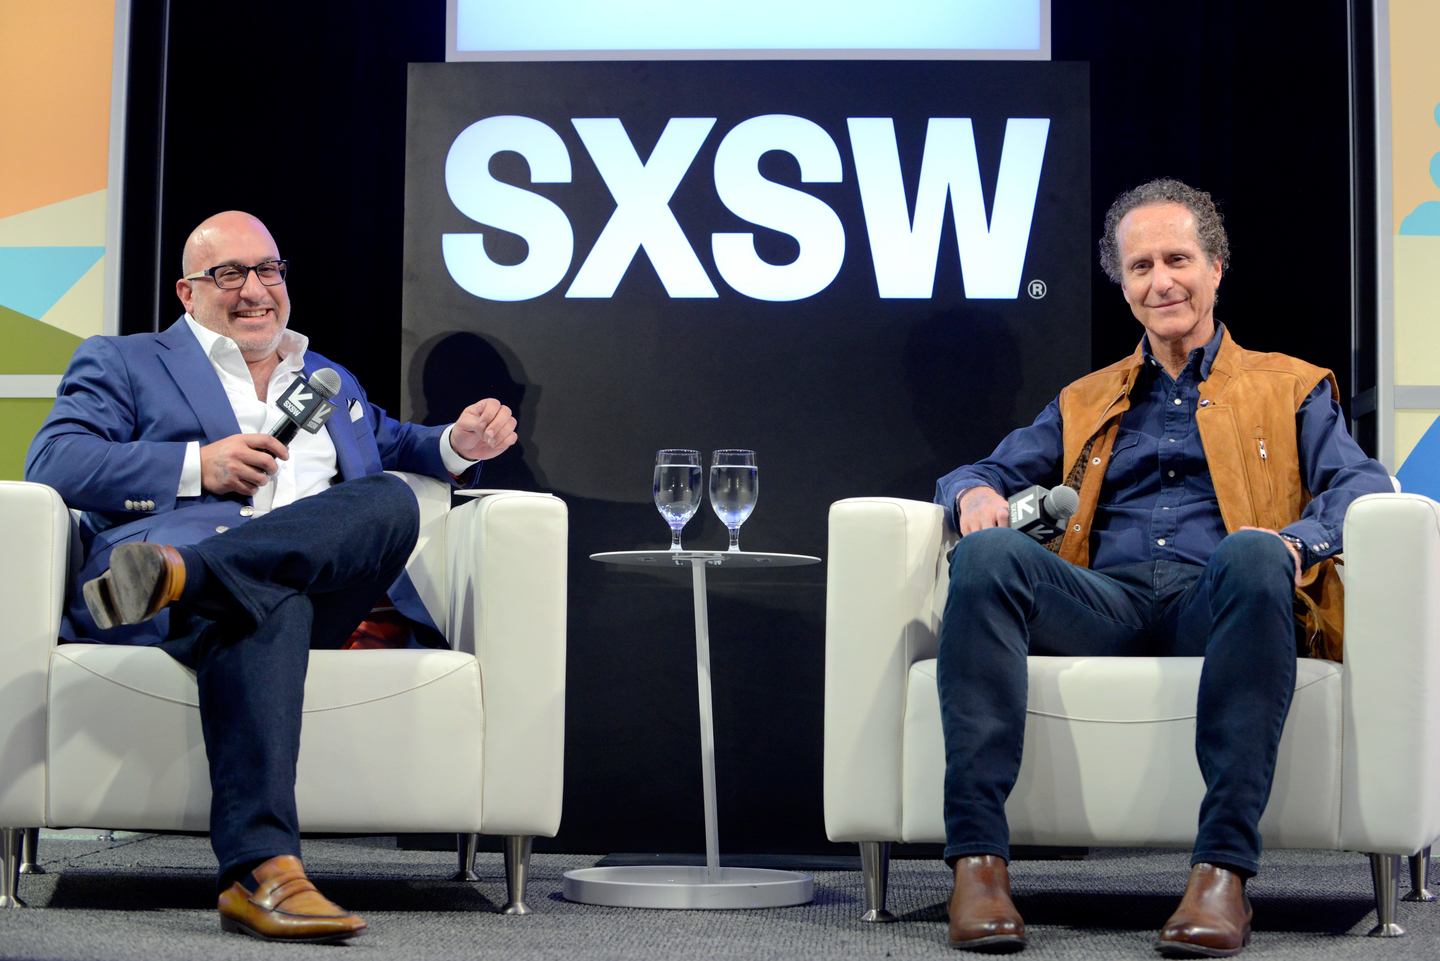 Daniel Glass (R) was a Featured Speaker in the Music Industry track on Thursday. Photo by Nicola Gell/Getty Images for SXSW